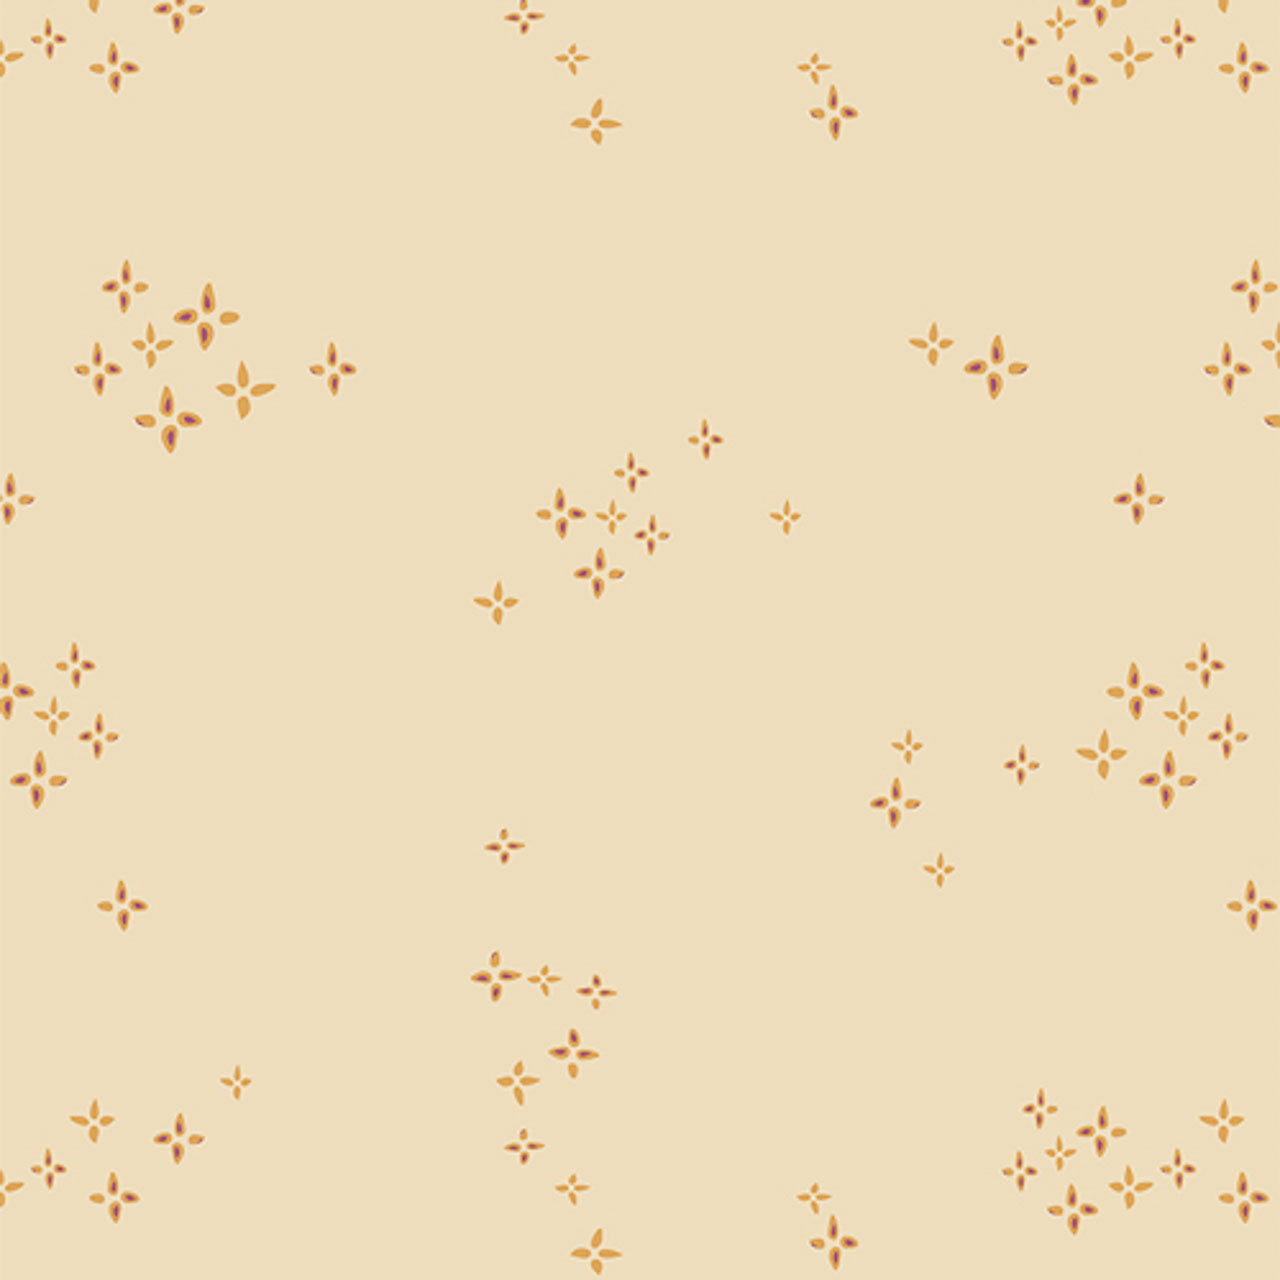 Beige 100% cotton fabric with delicate floral pattern from Art Gallery Fabrics' Crafting Magic collection, named Twinklestar Five.